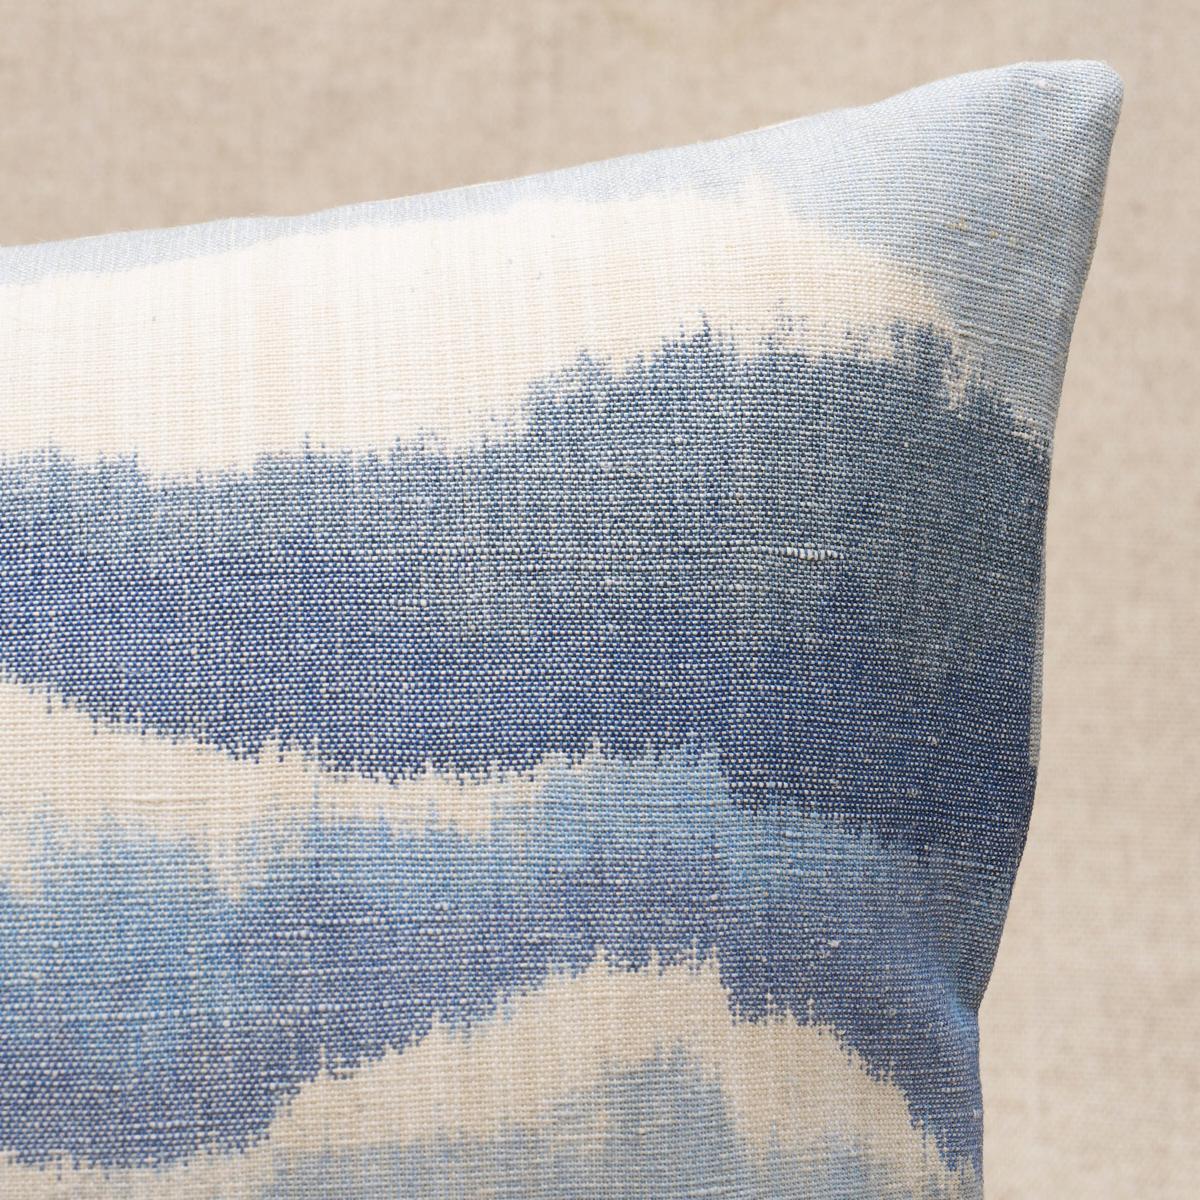 This pillow features Chandler Warp Print with a knife edge finish. Only a true warp print could achieve the ethereal effect that makes this soft horizontal stripe fabric so unique. Pillow includes a feather/down fill insert and hidden zipper